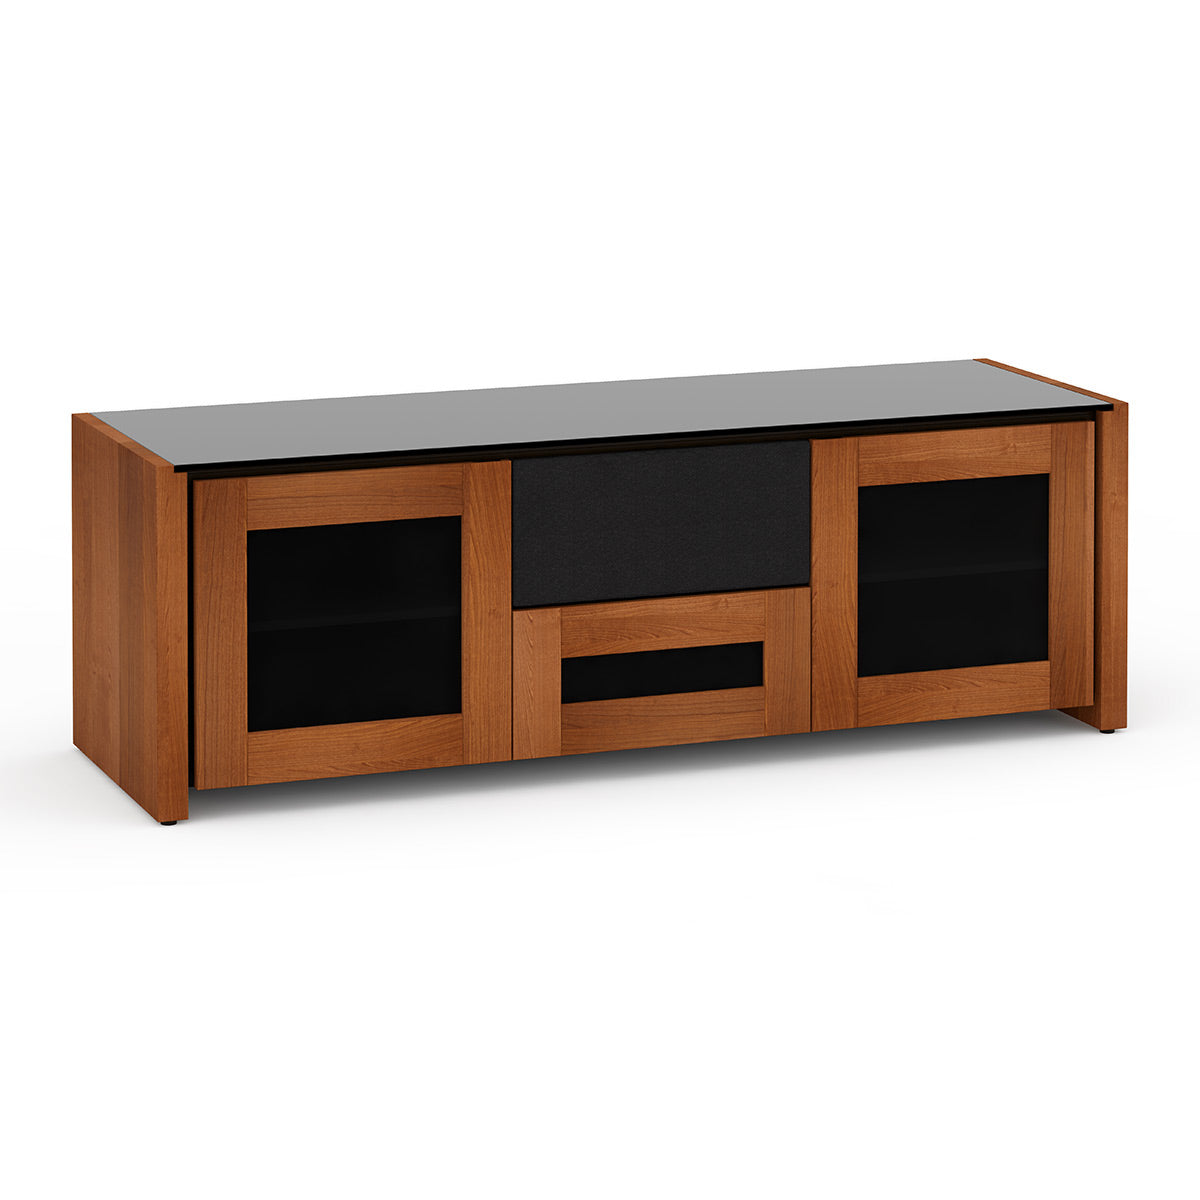 Salamander Chameleon Collection Corsica 236 Triple Speaker Integrated Cabinet (Thick Cherry with Black Glass Top)